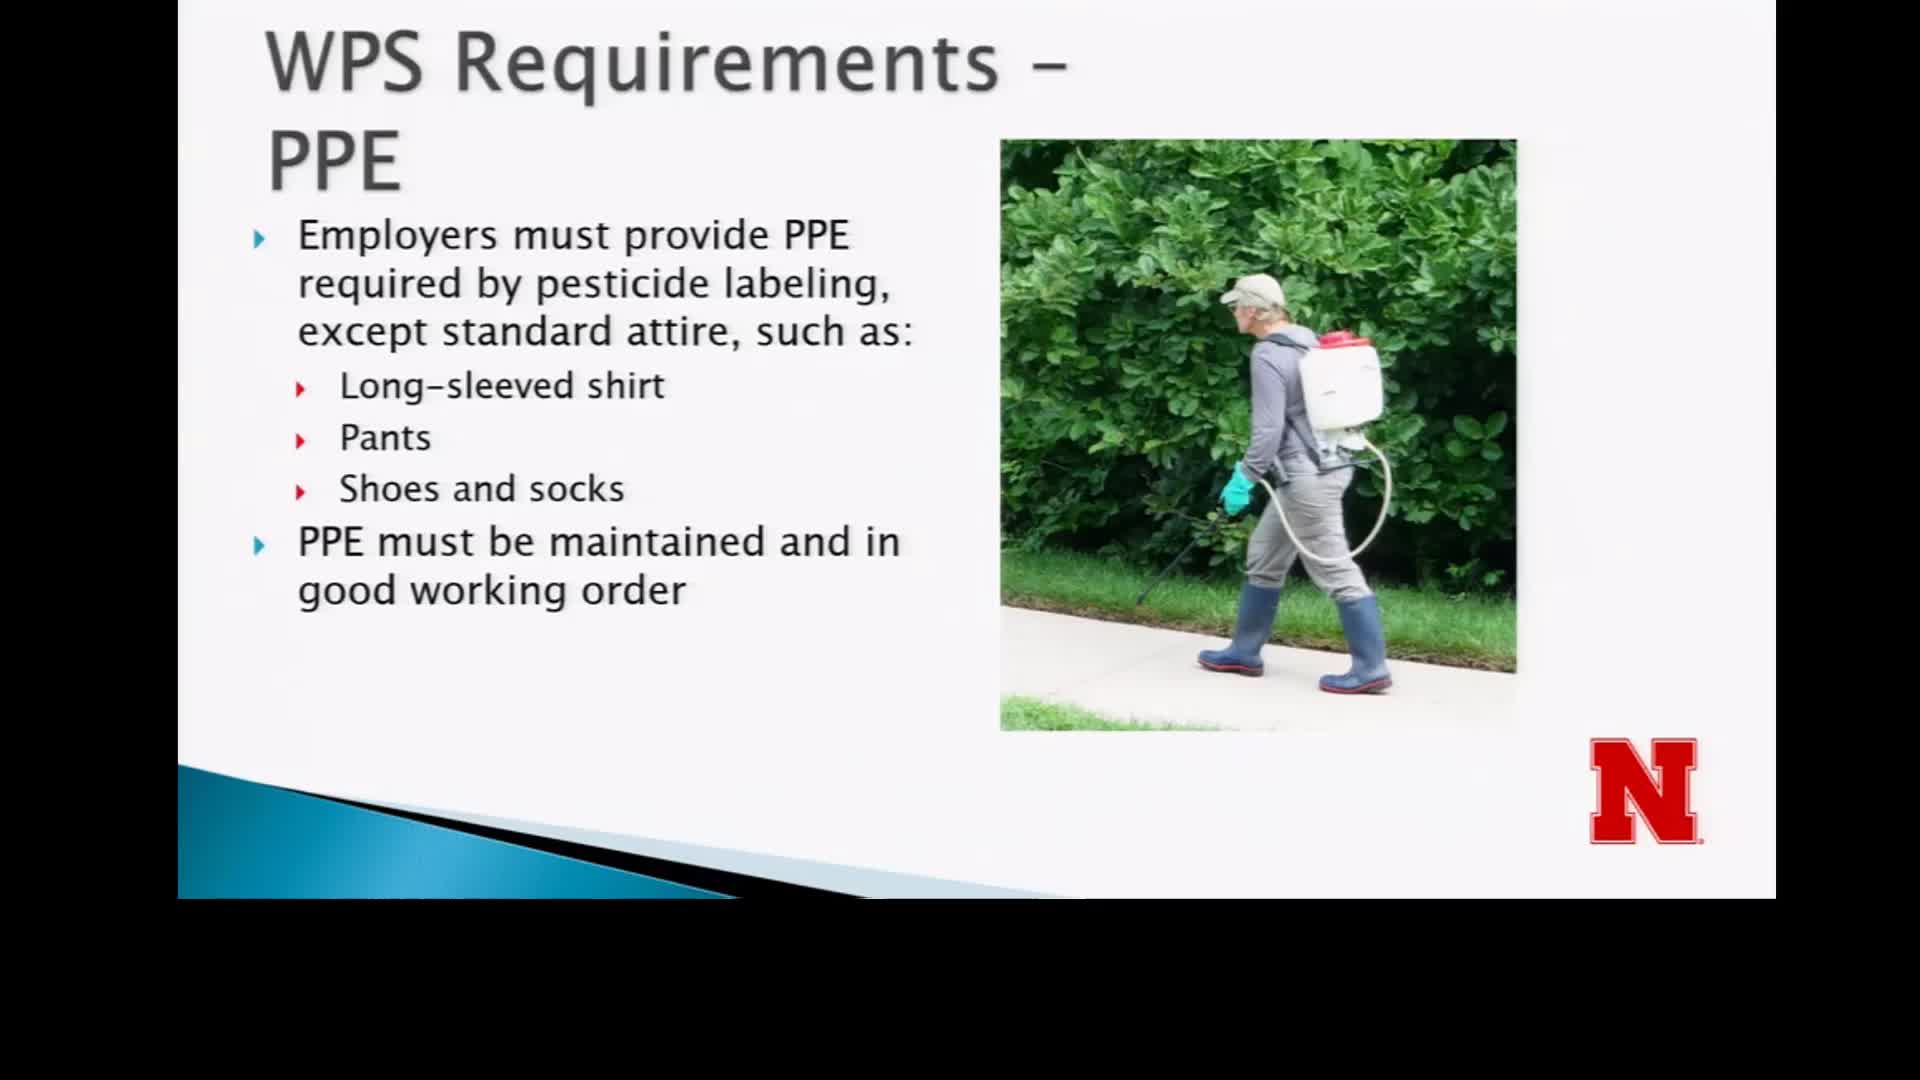 Worker Protection Standard Requirements for PPE